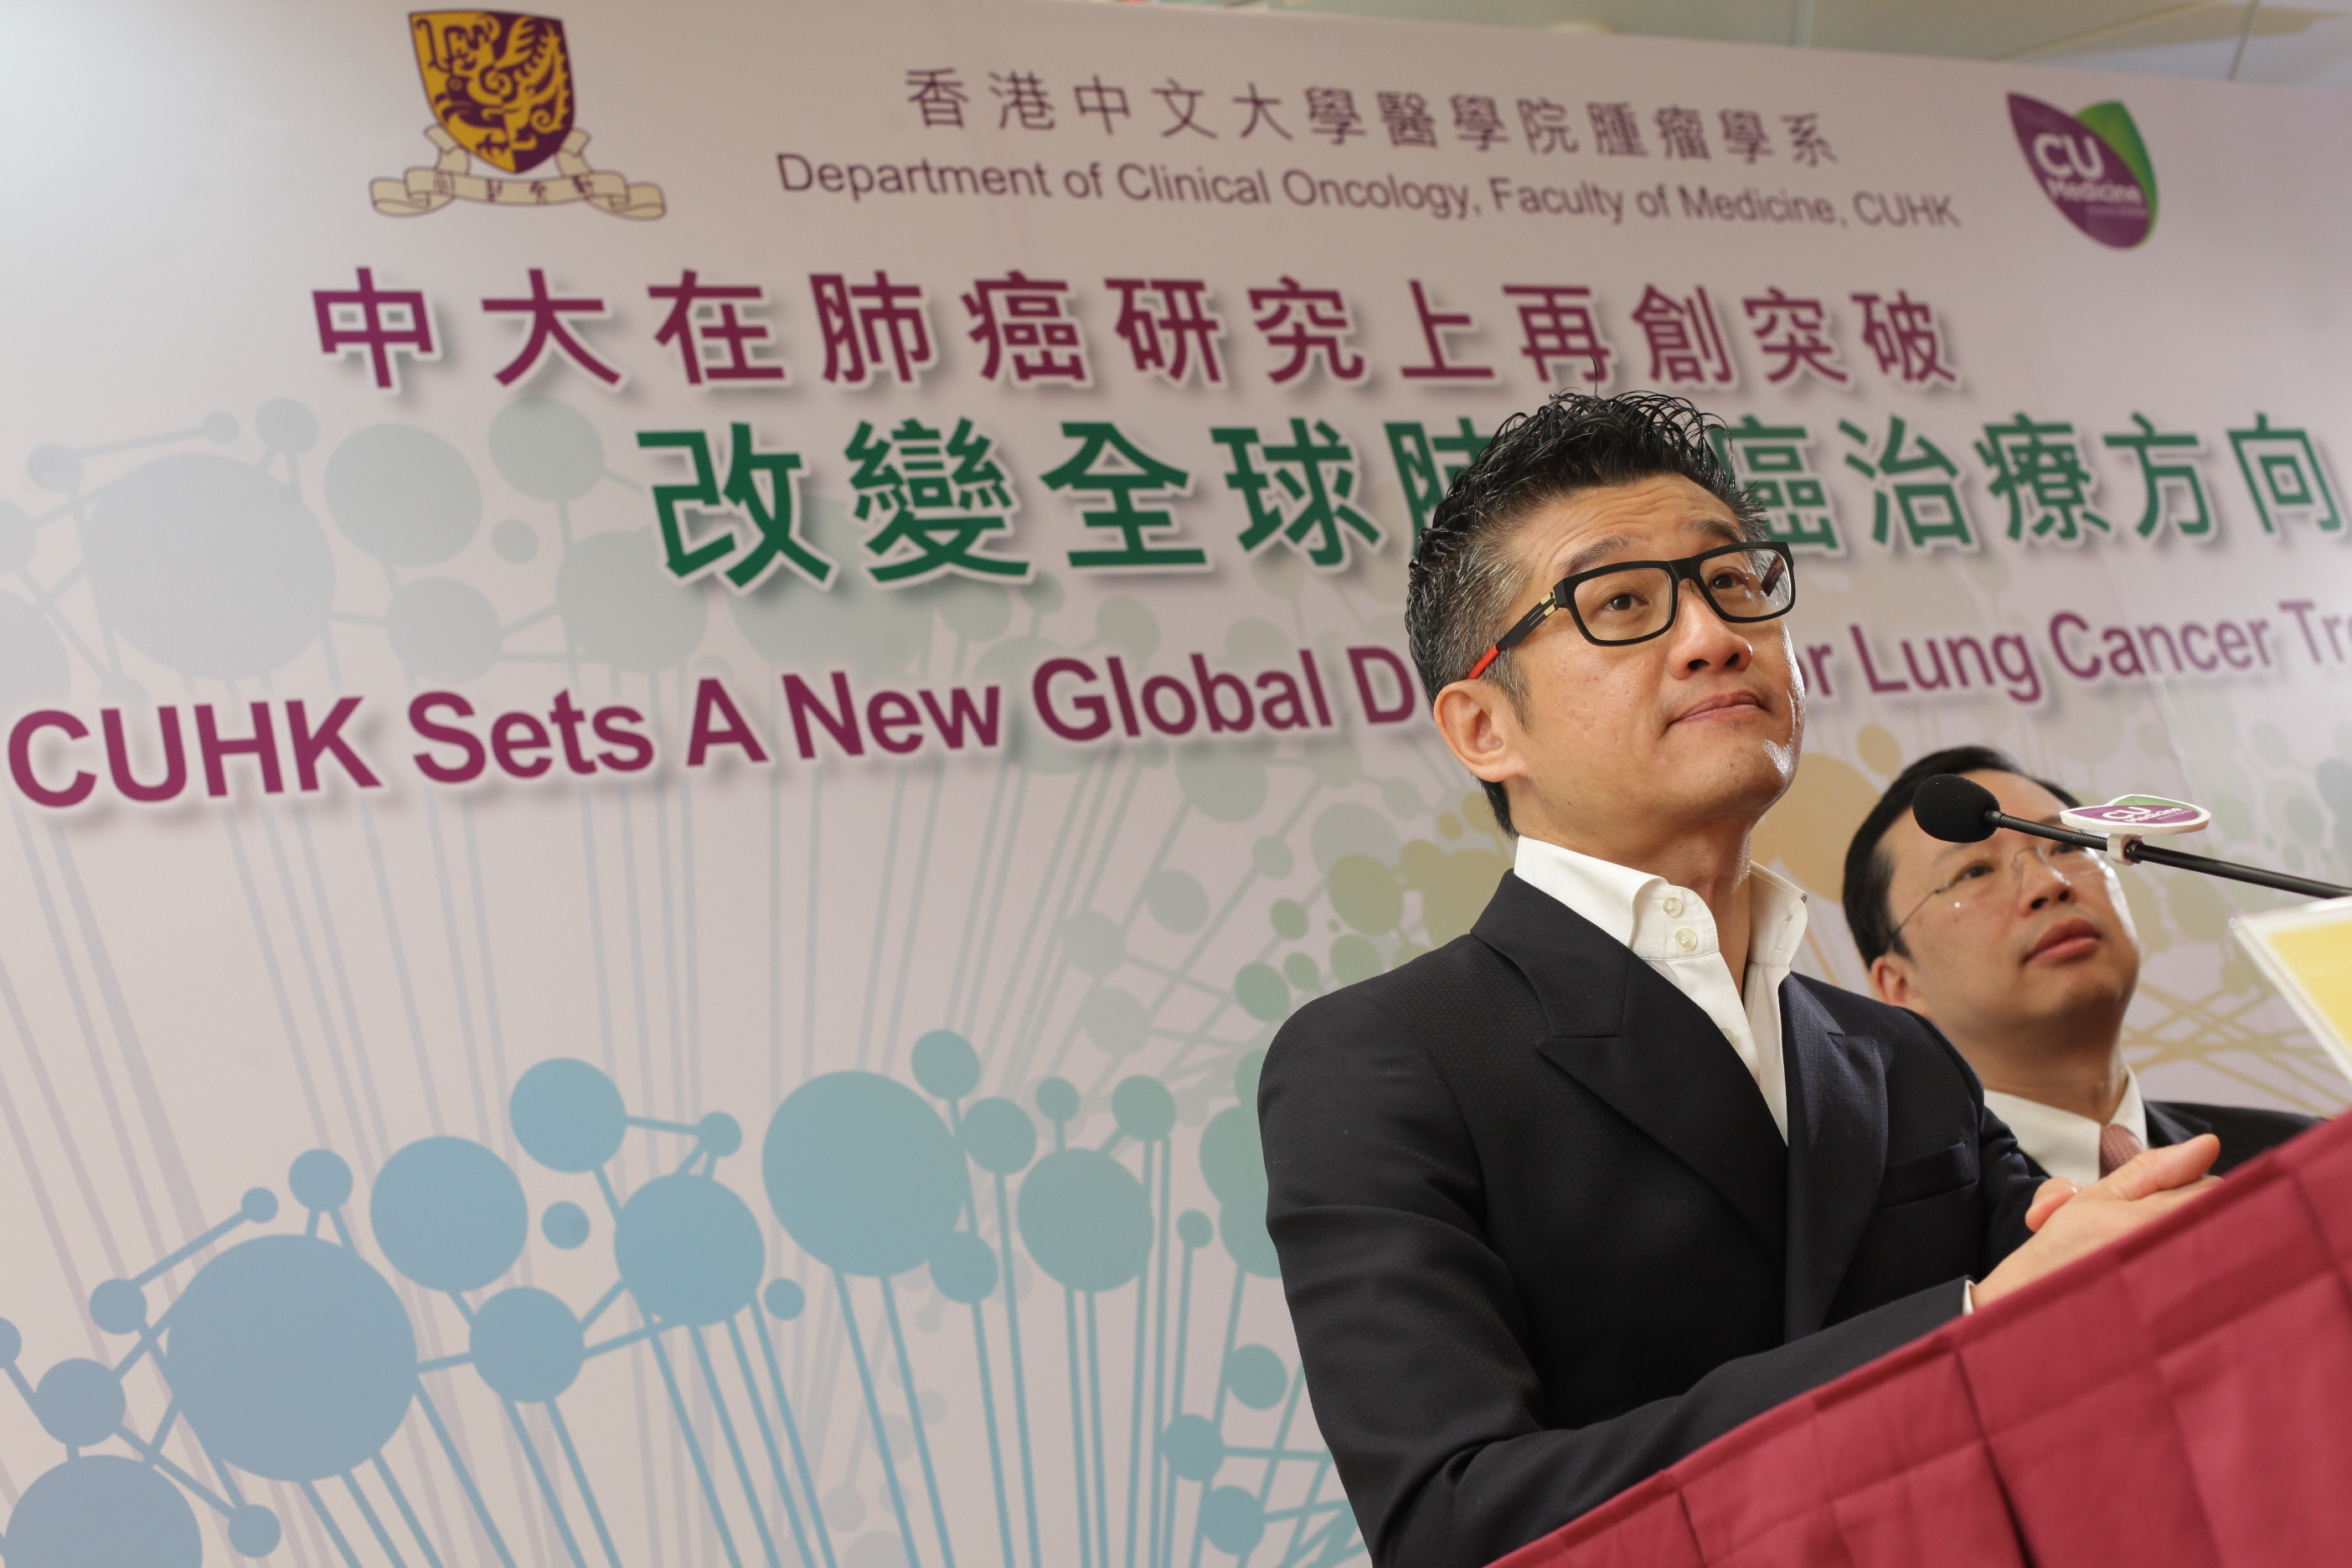 The ground breaking research by Prof., Professor, Department of Clinical Oncology at CUHK